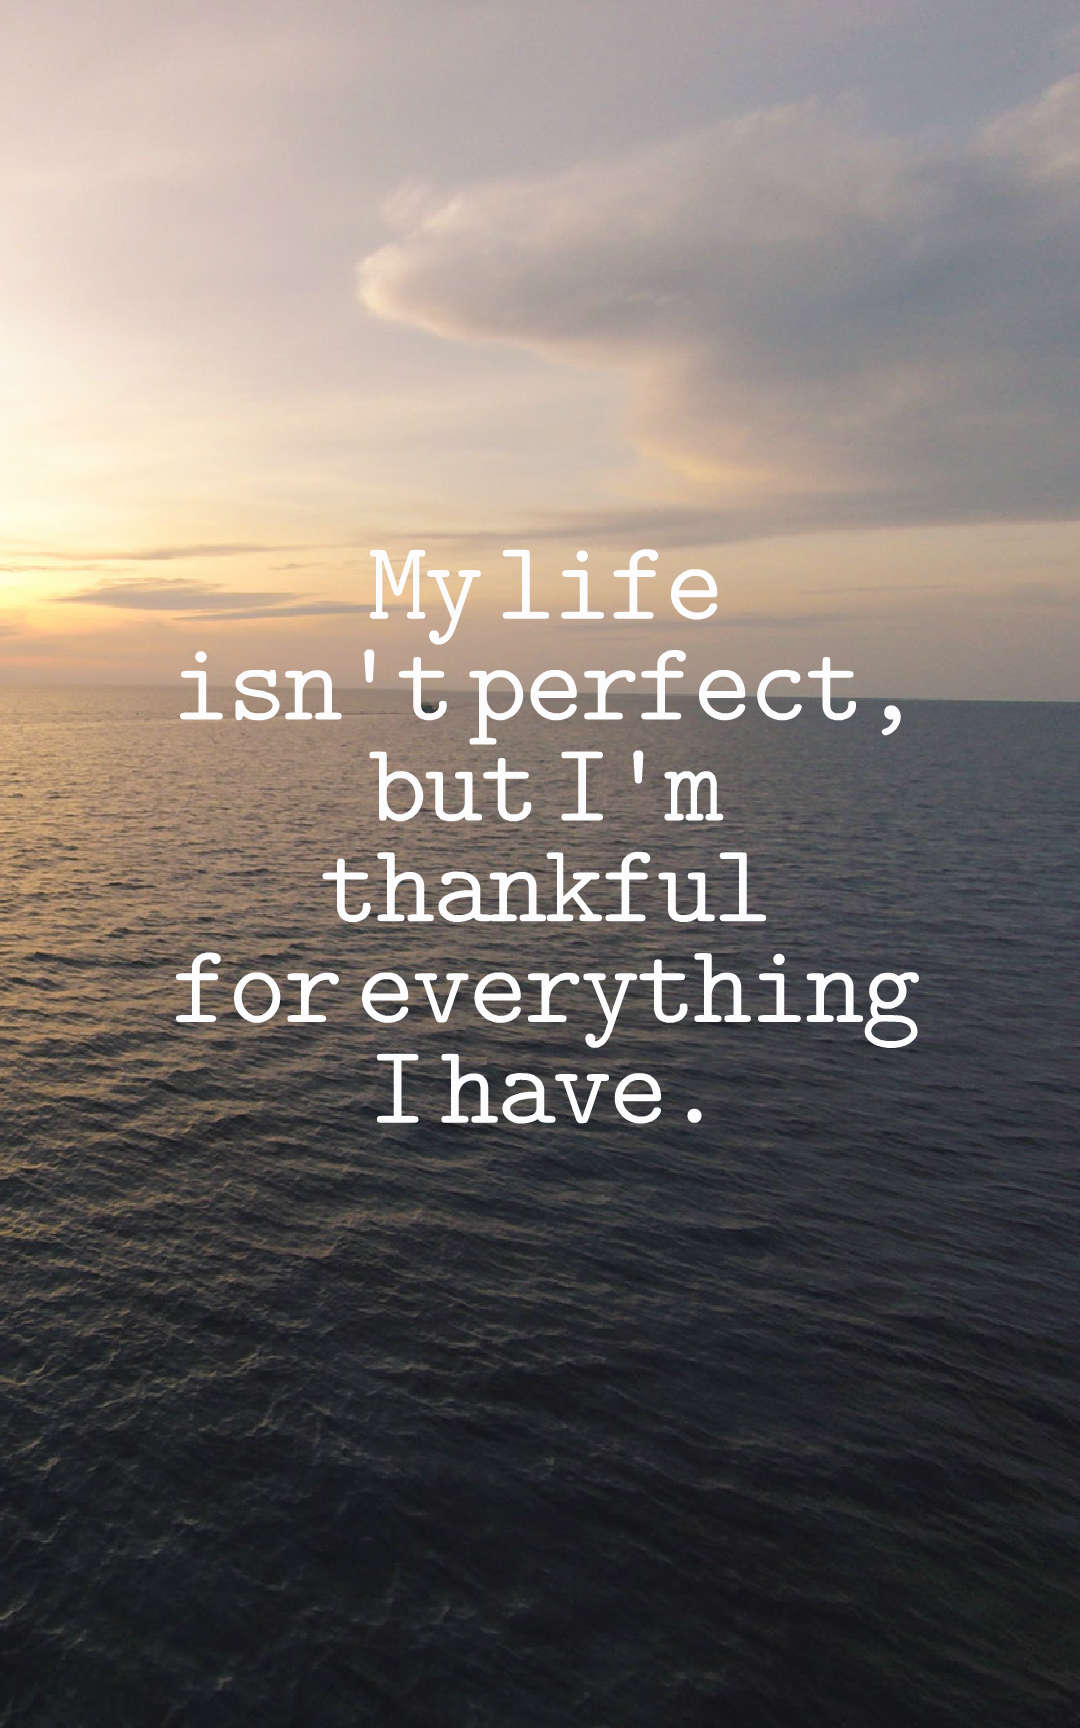 My life isn't perfect, but I'm thankful for everything I have.